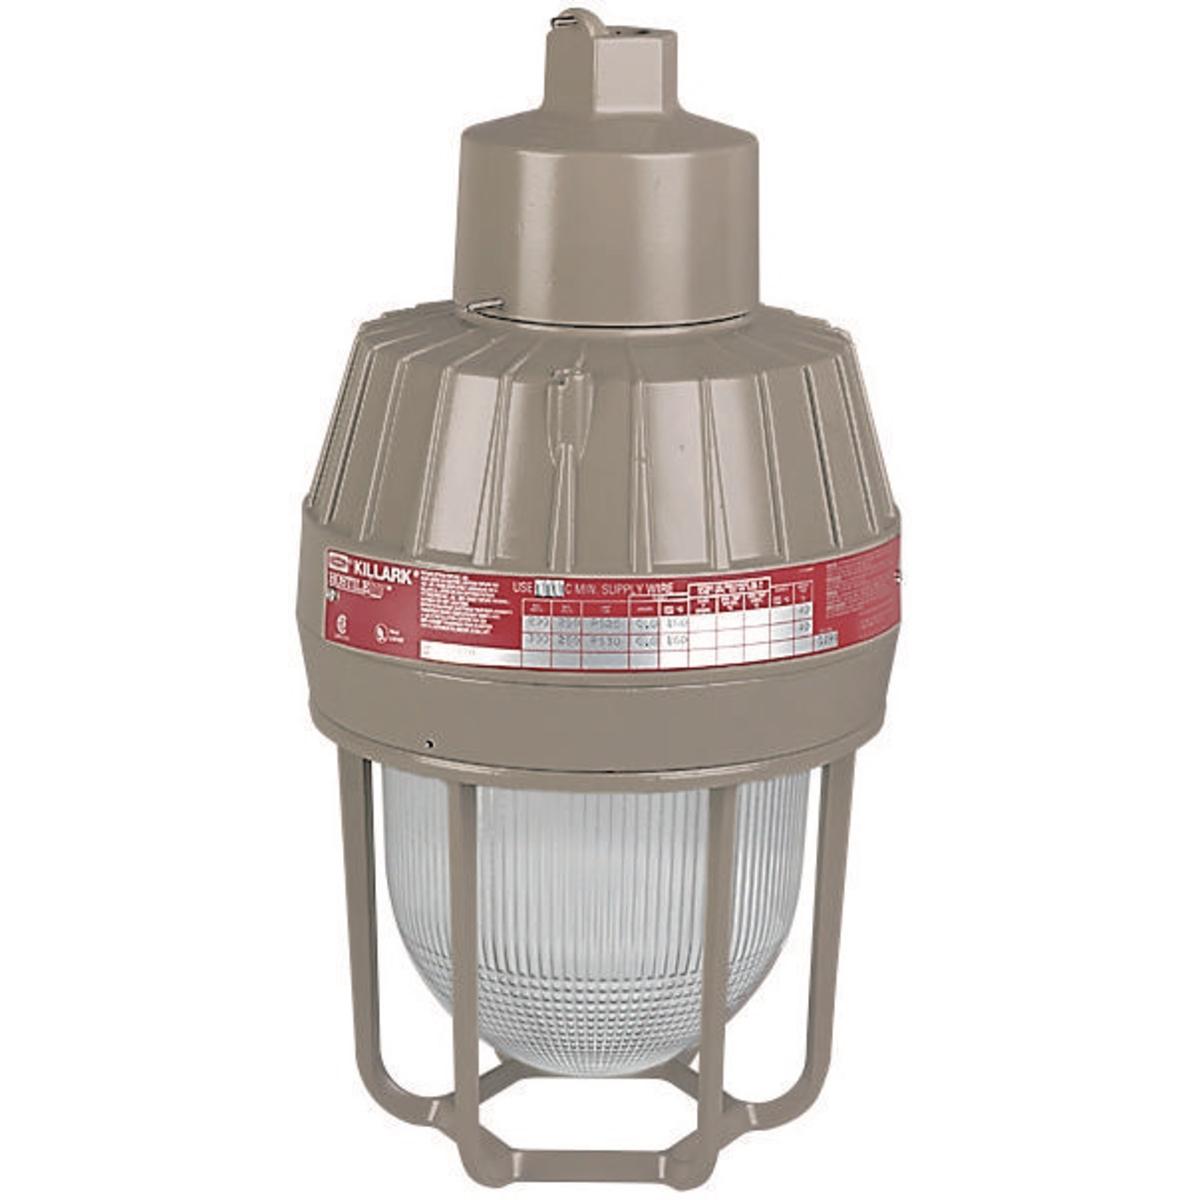 Hubbell EMS105A2G EM HPS  100W 480V 3/4" Pendant with Guard  ; Four light sources—Incandescent, compact fluorescent, high pressure sodium and metal halide ; Mounting choice—Pendant, ceiling, 25˚ stanchion or 90˚ wall mount, all with “wireless” design that allows fast, easy